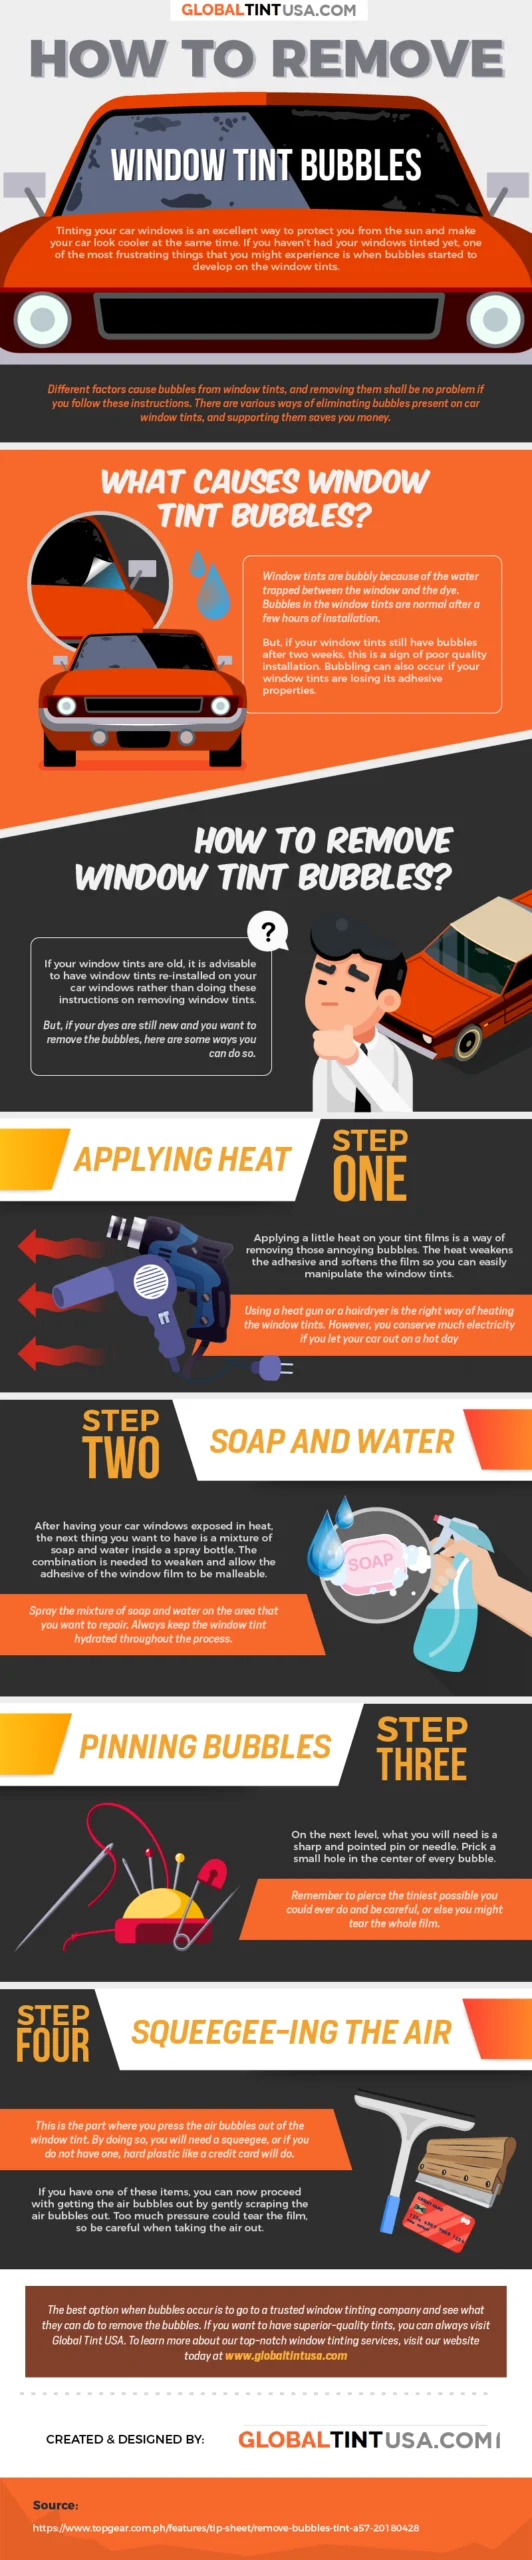 How To Remove Window Tint Bubbles [Info Graphic]
